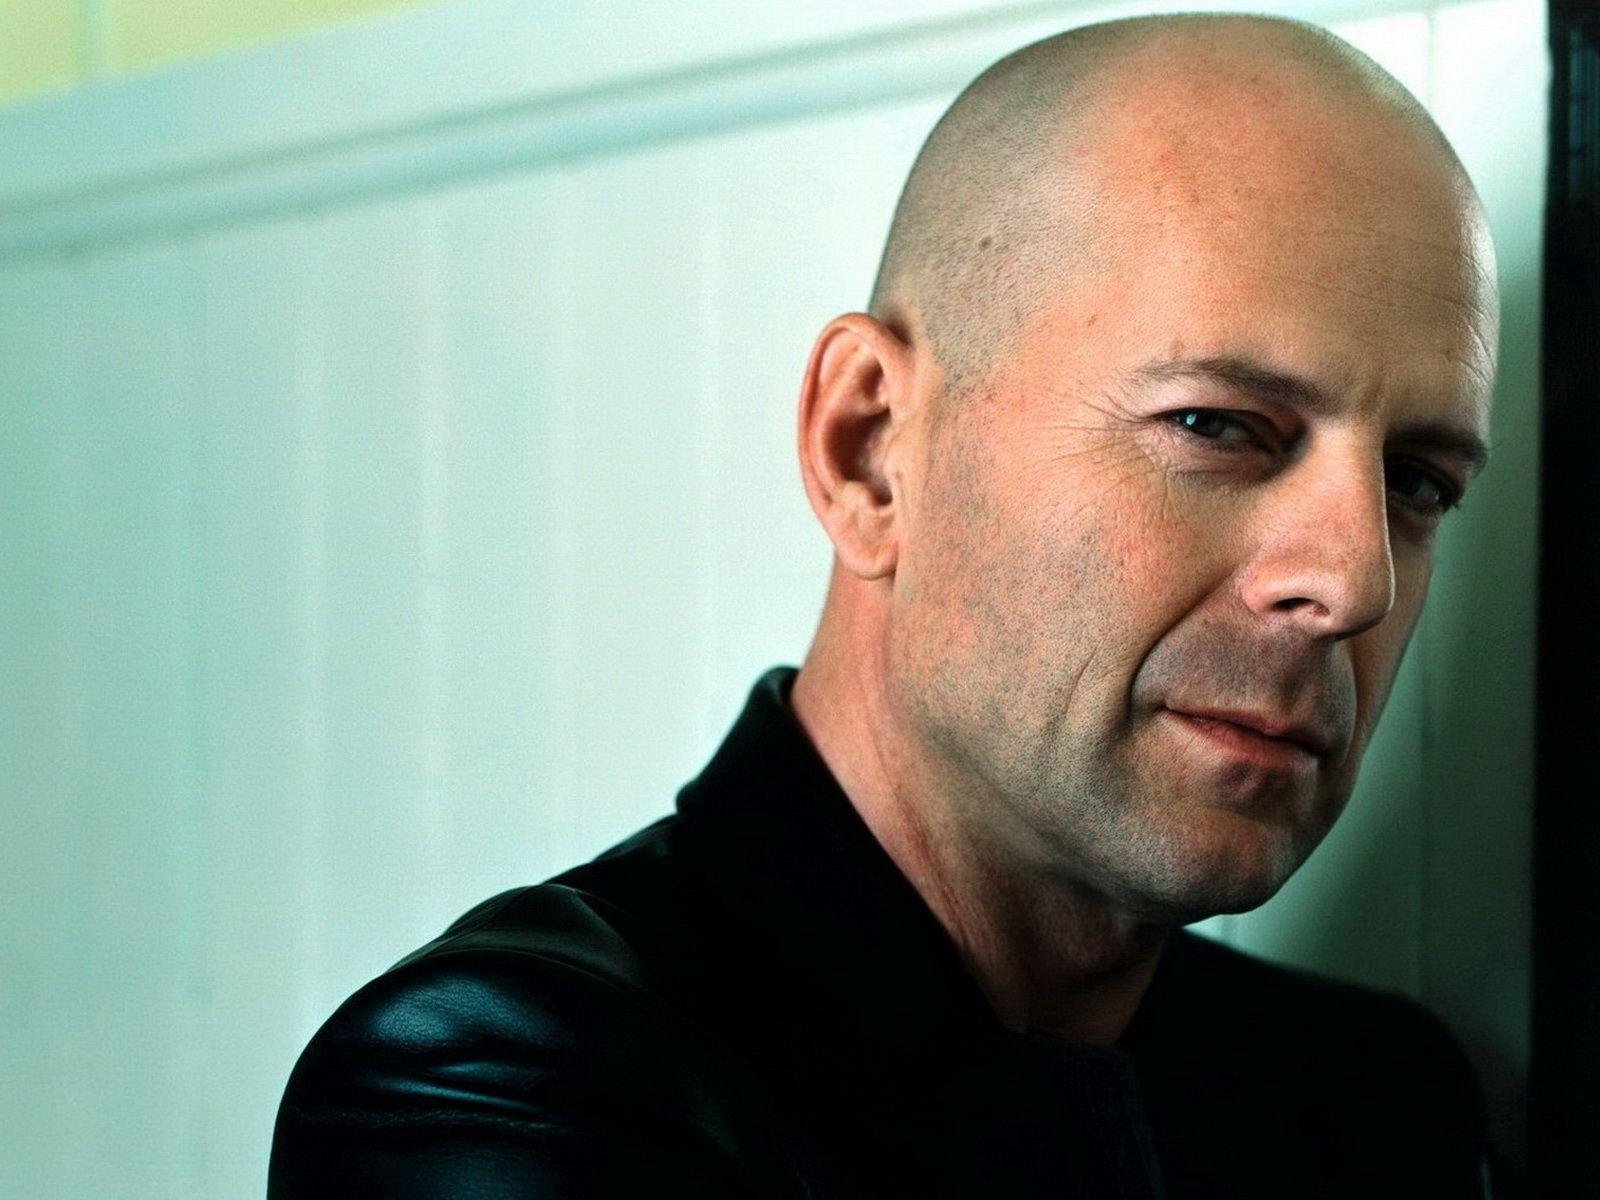 Bruce Willis Wallpaper High Resolution and Quality Download